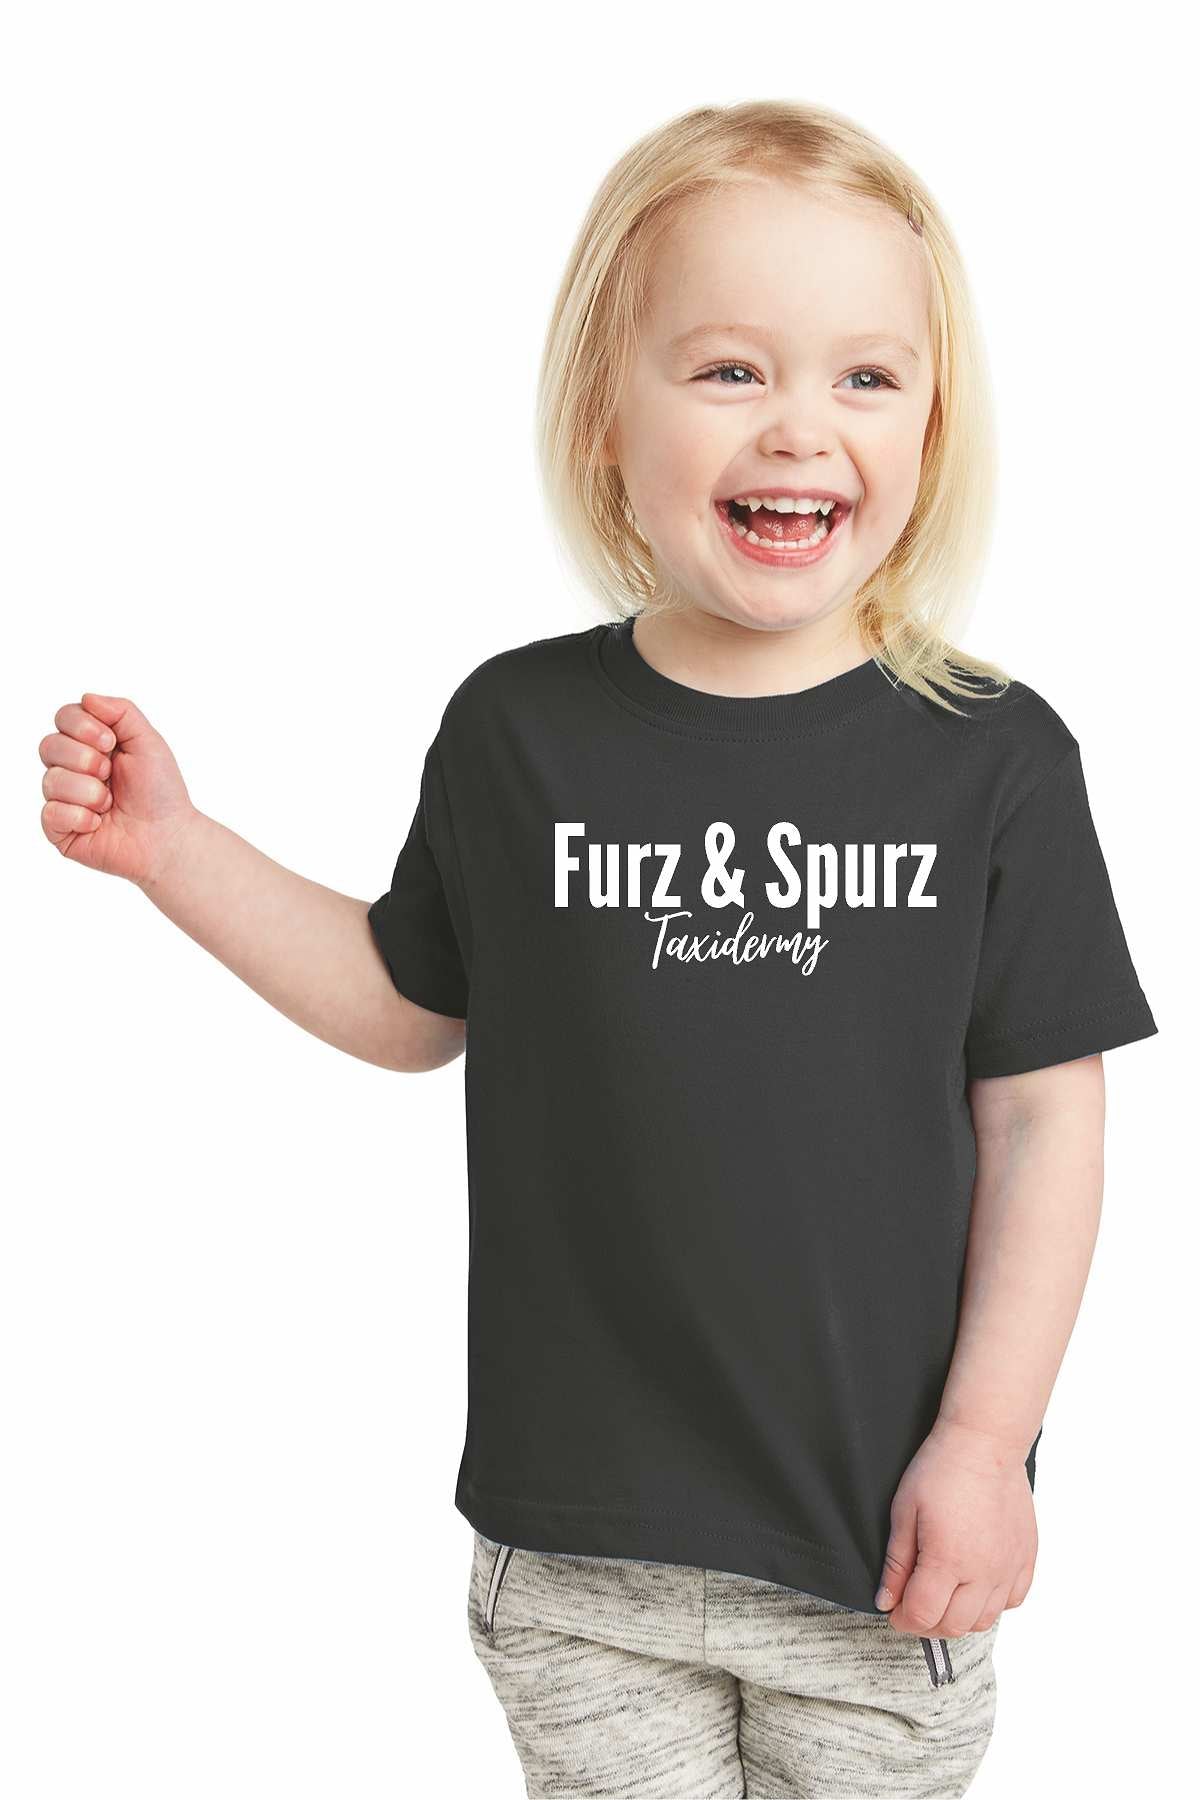 Furz and Spurz Toddler Unisex Tshirts RS3321